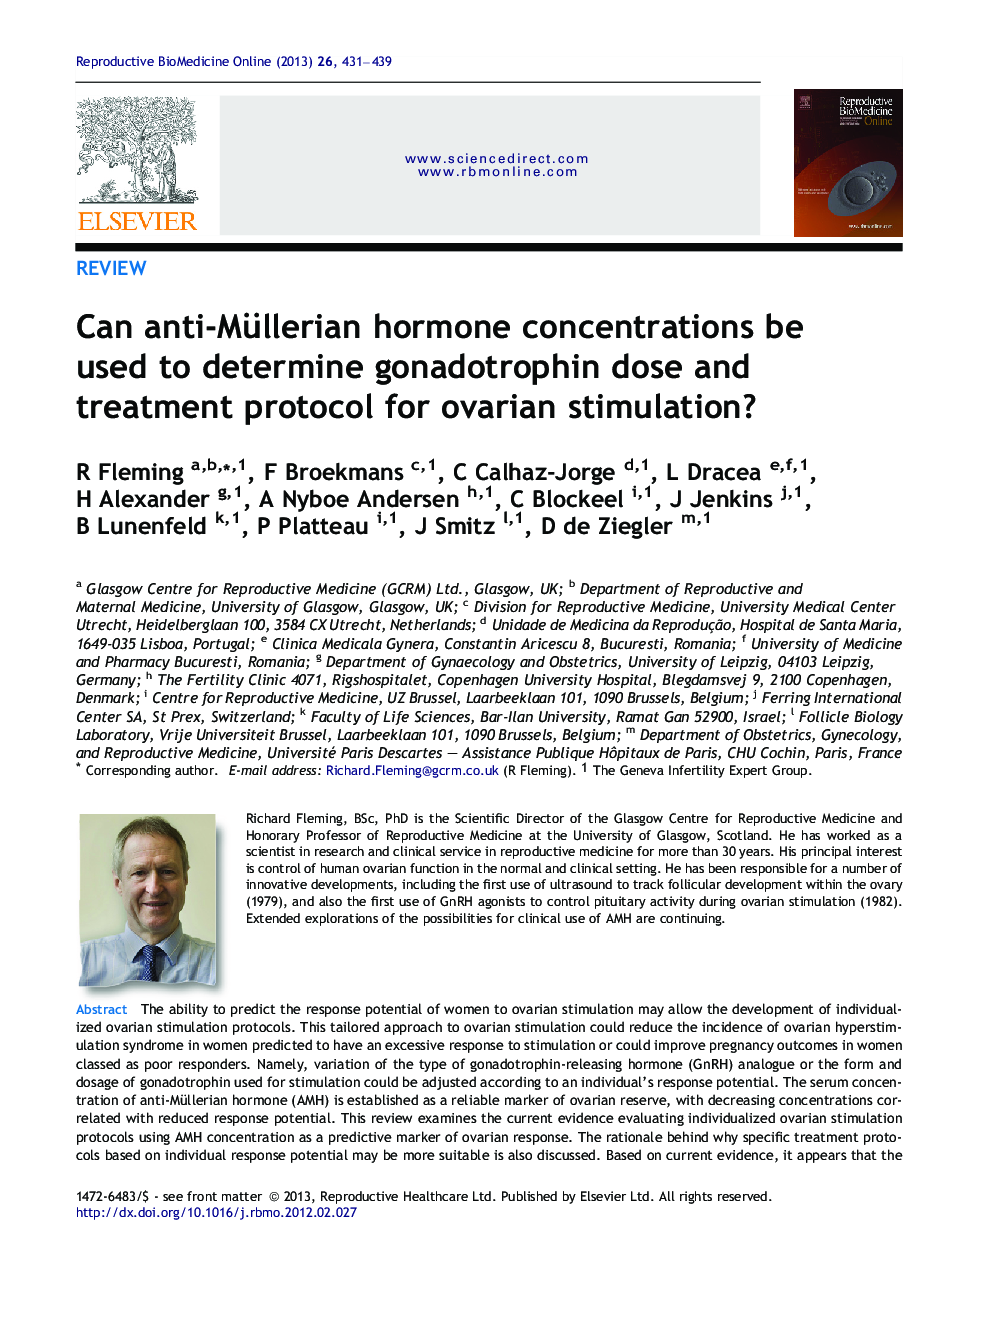 Can anti-Müllerian hormone concentrations be used to determine gonadotrophin dose and treatment protocol for ovarian stimulation?